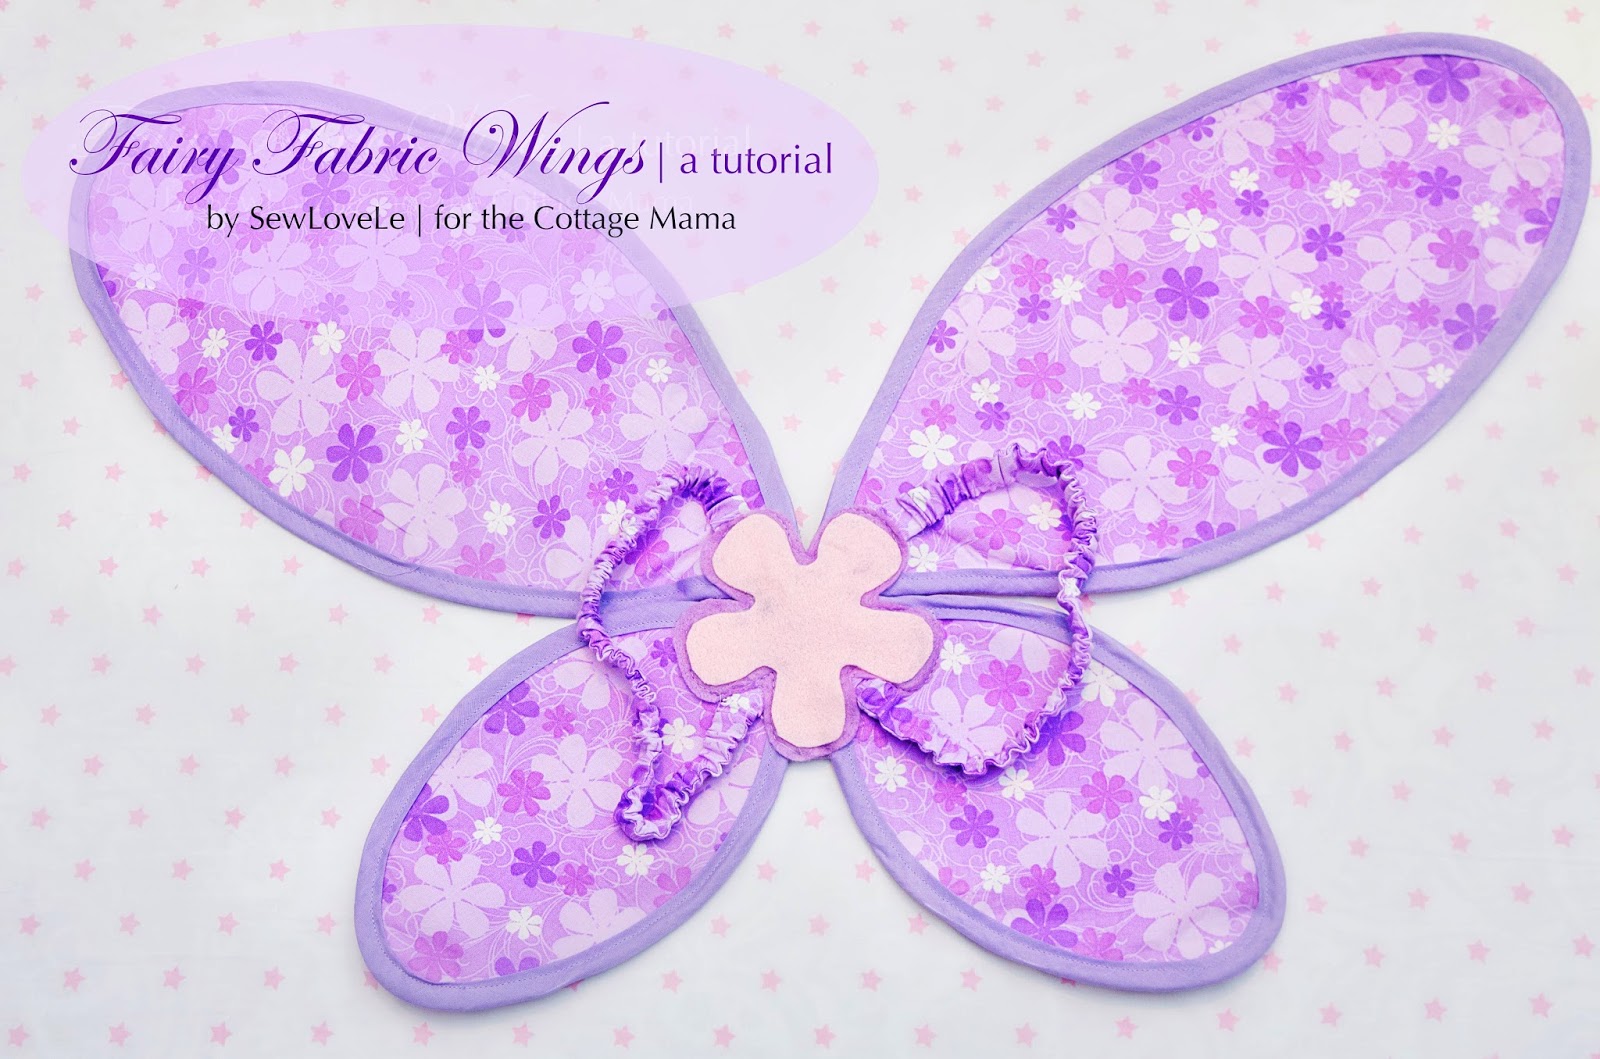 Free Fairy Fabric Wings Pattern and Tutorial. www.thecottagemama.com